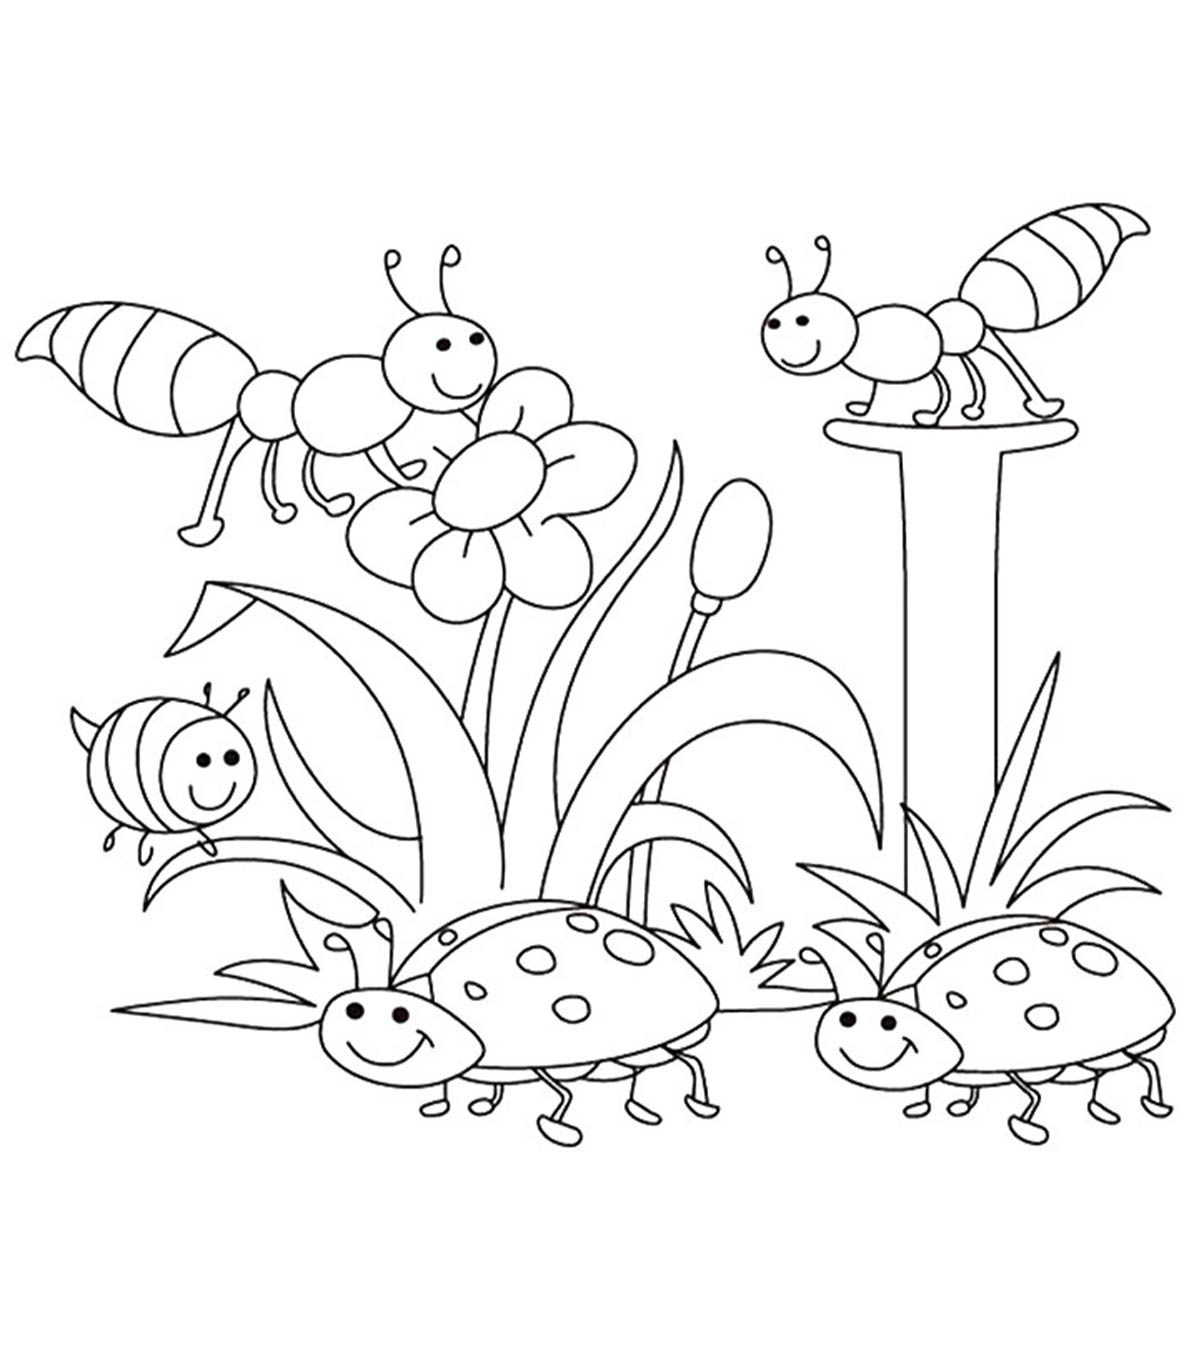 Spring Coloring Pages Top 35 Free Printable Spring Coloring Pages Online